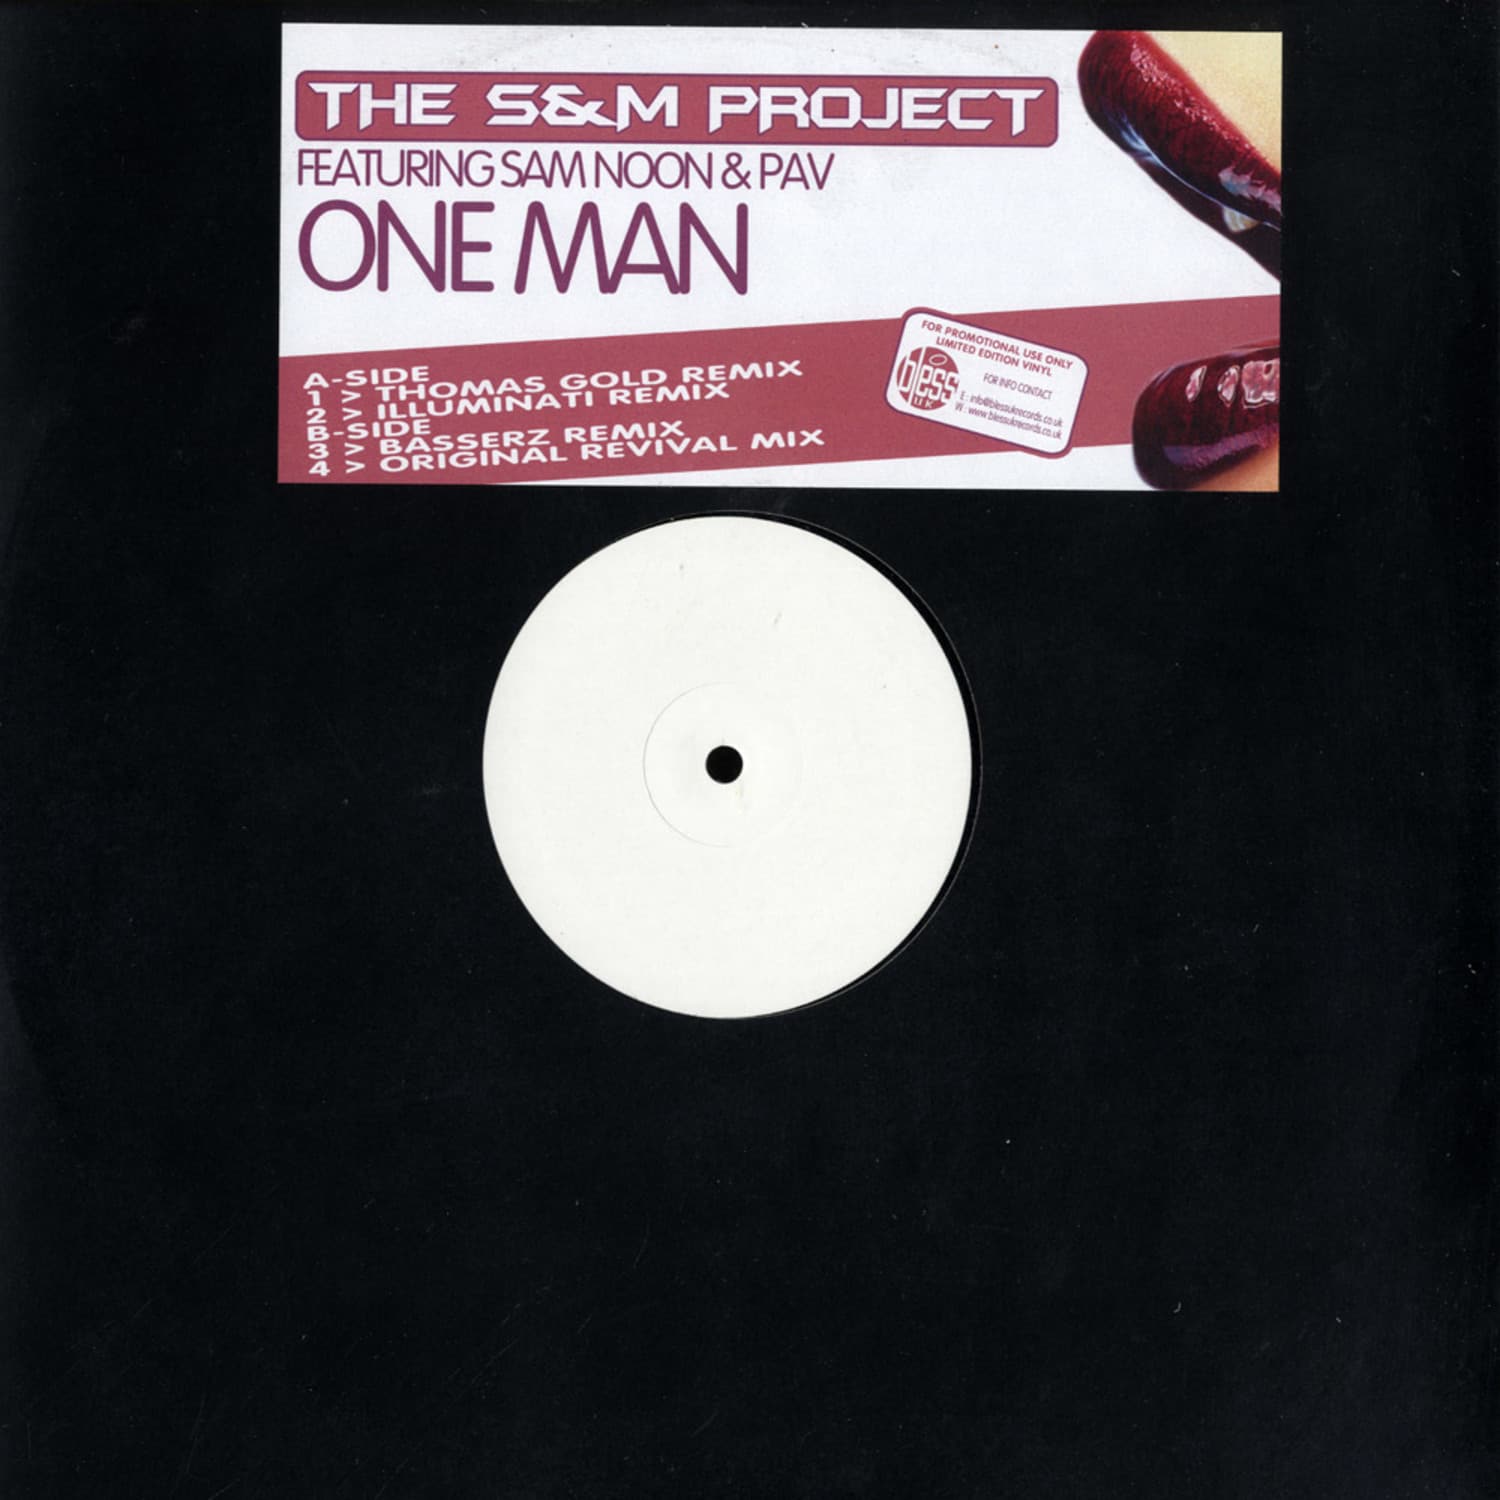 The S&M Project - ONE MAN